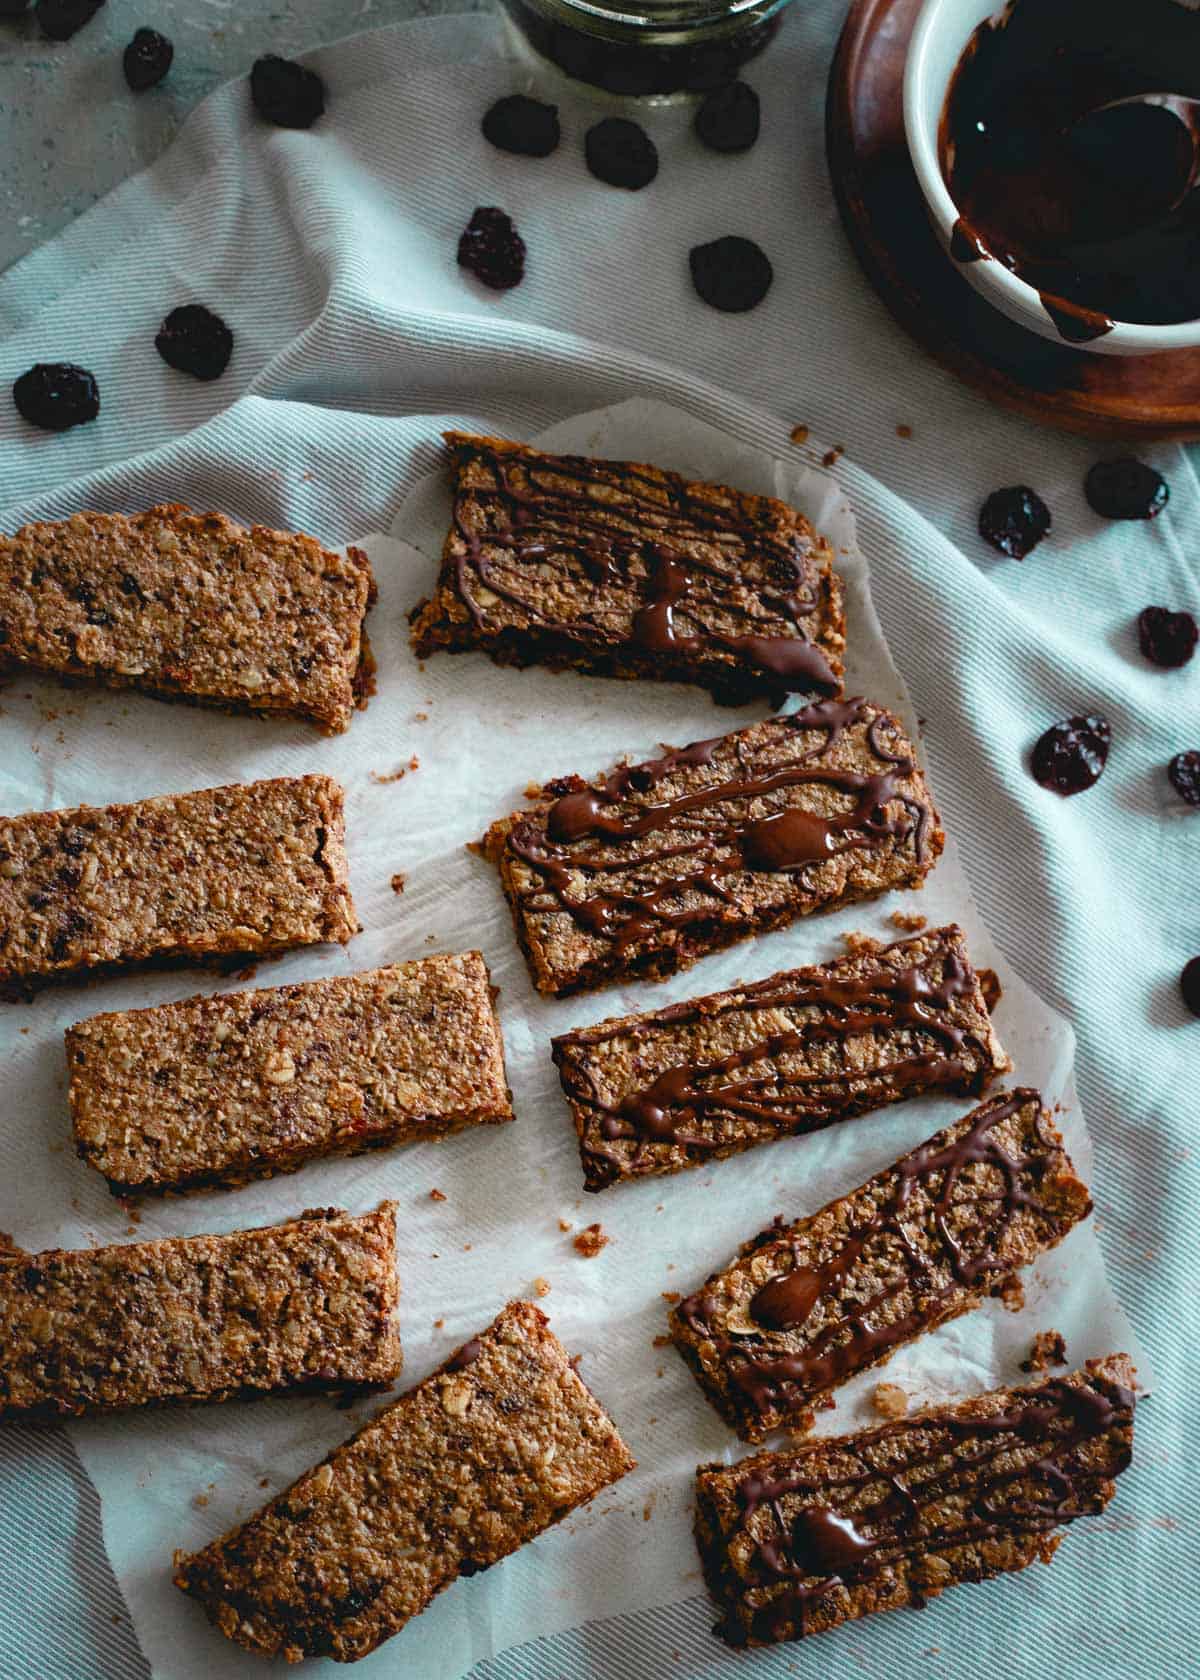 Snacking just got a whole lot healthier with these chewy tart cherry oat bars.